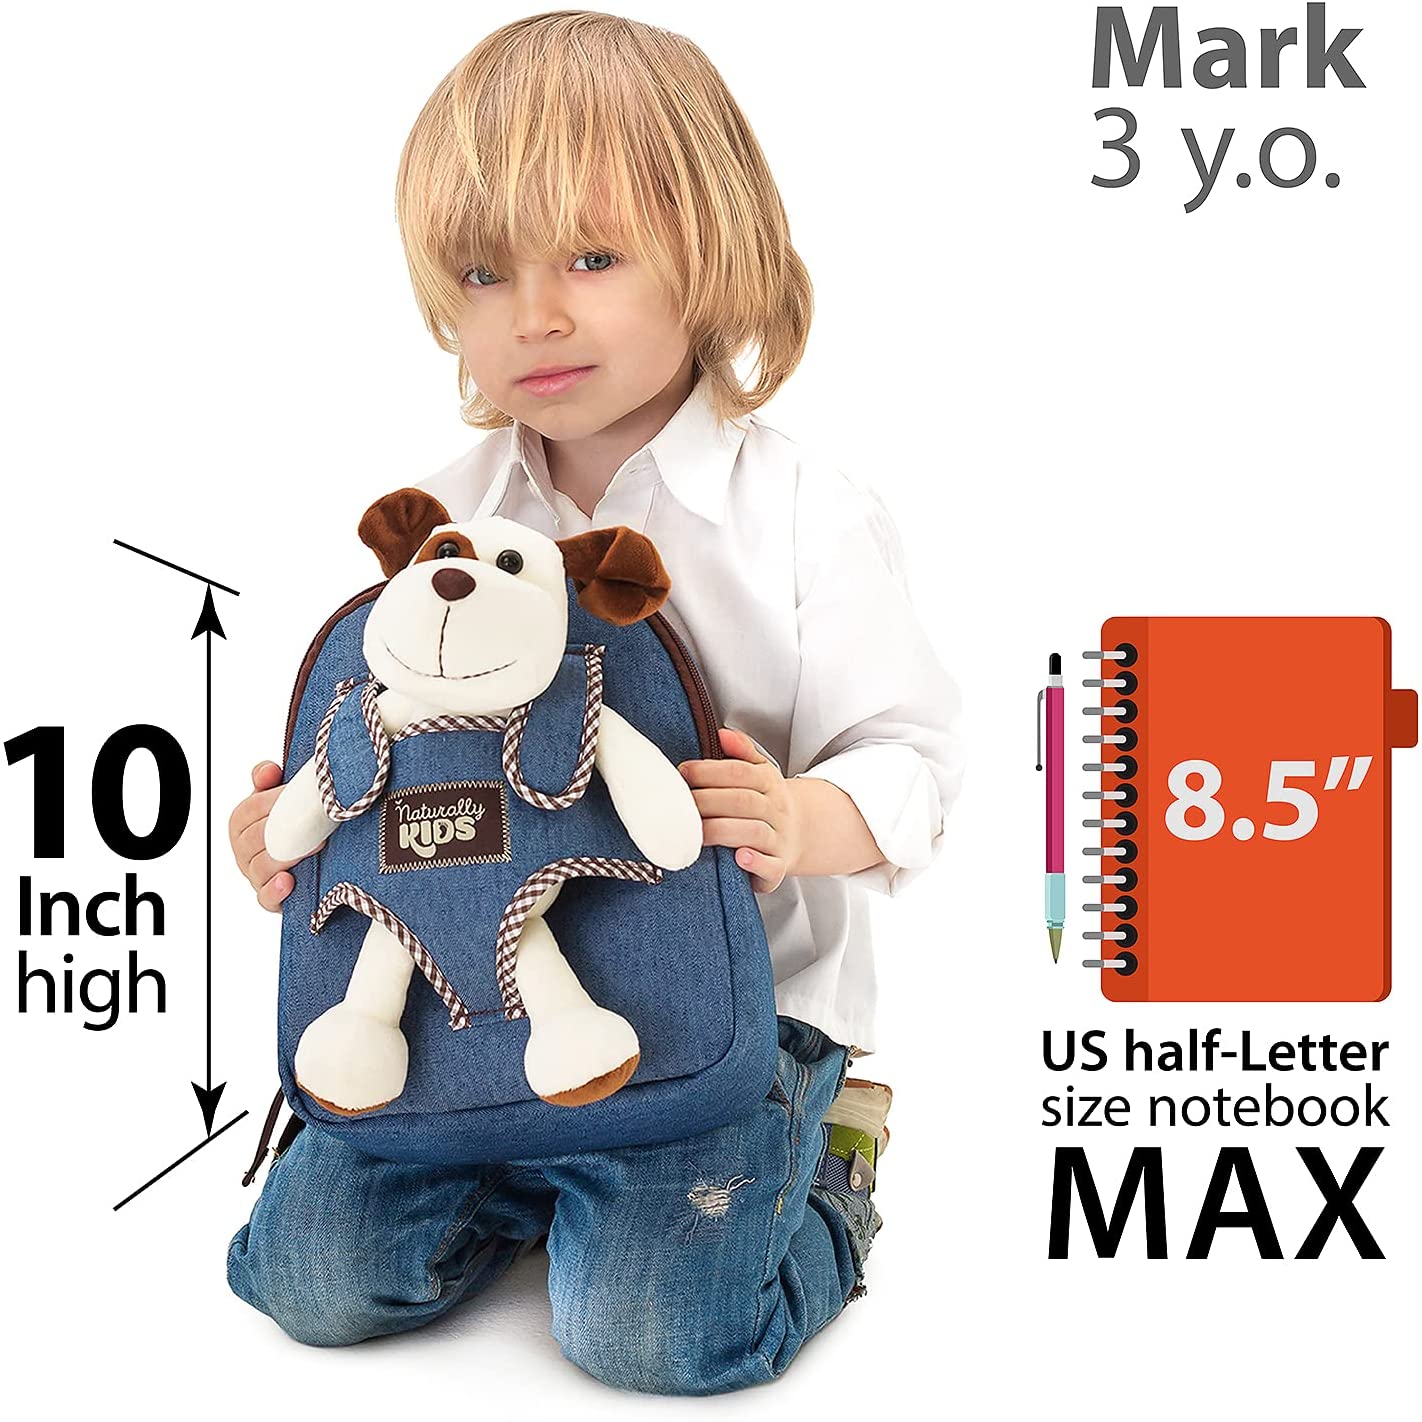 Naturally KIDS Small Backpack w Stuffed Animal Dog Plush Toy - Toddler Backpack for Boy Backpack for Kids - Toys for Kids Ages 3 4 5 6 7 Toys for 3 Year Old Boys Puppy Backpack - 4 Year Old Girl Gift - image 2 of 9